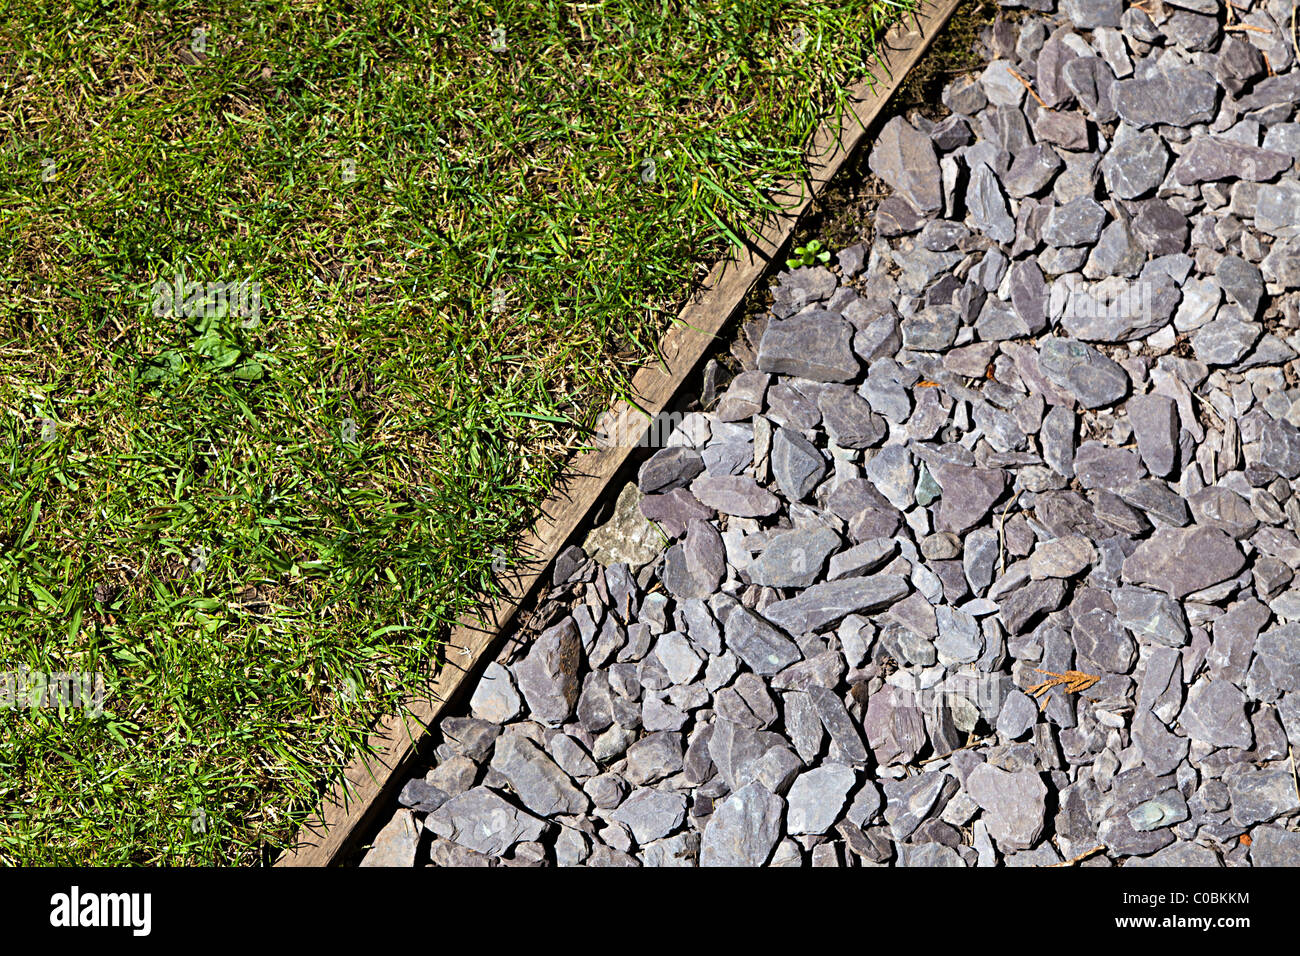 Stones used to make path alongside lawn in garden Wales UK Stock Photo